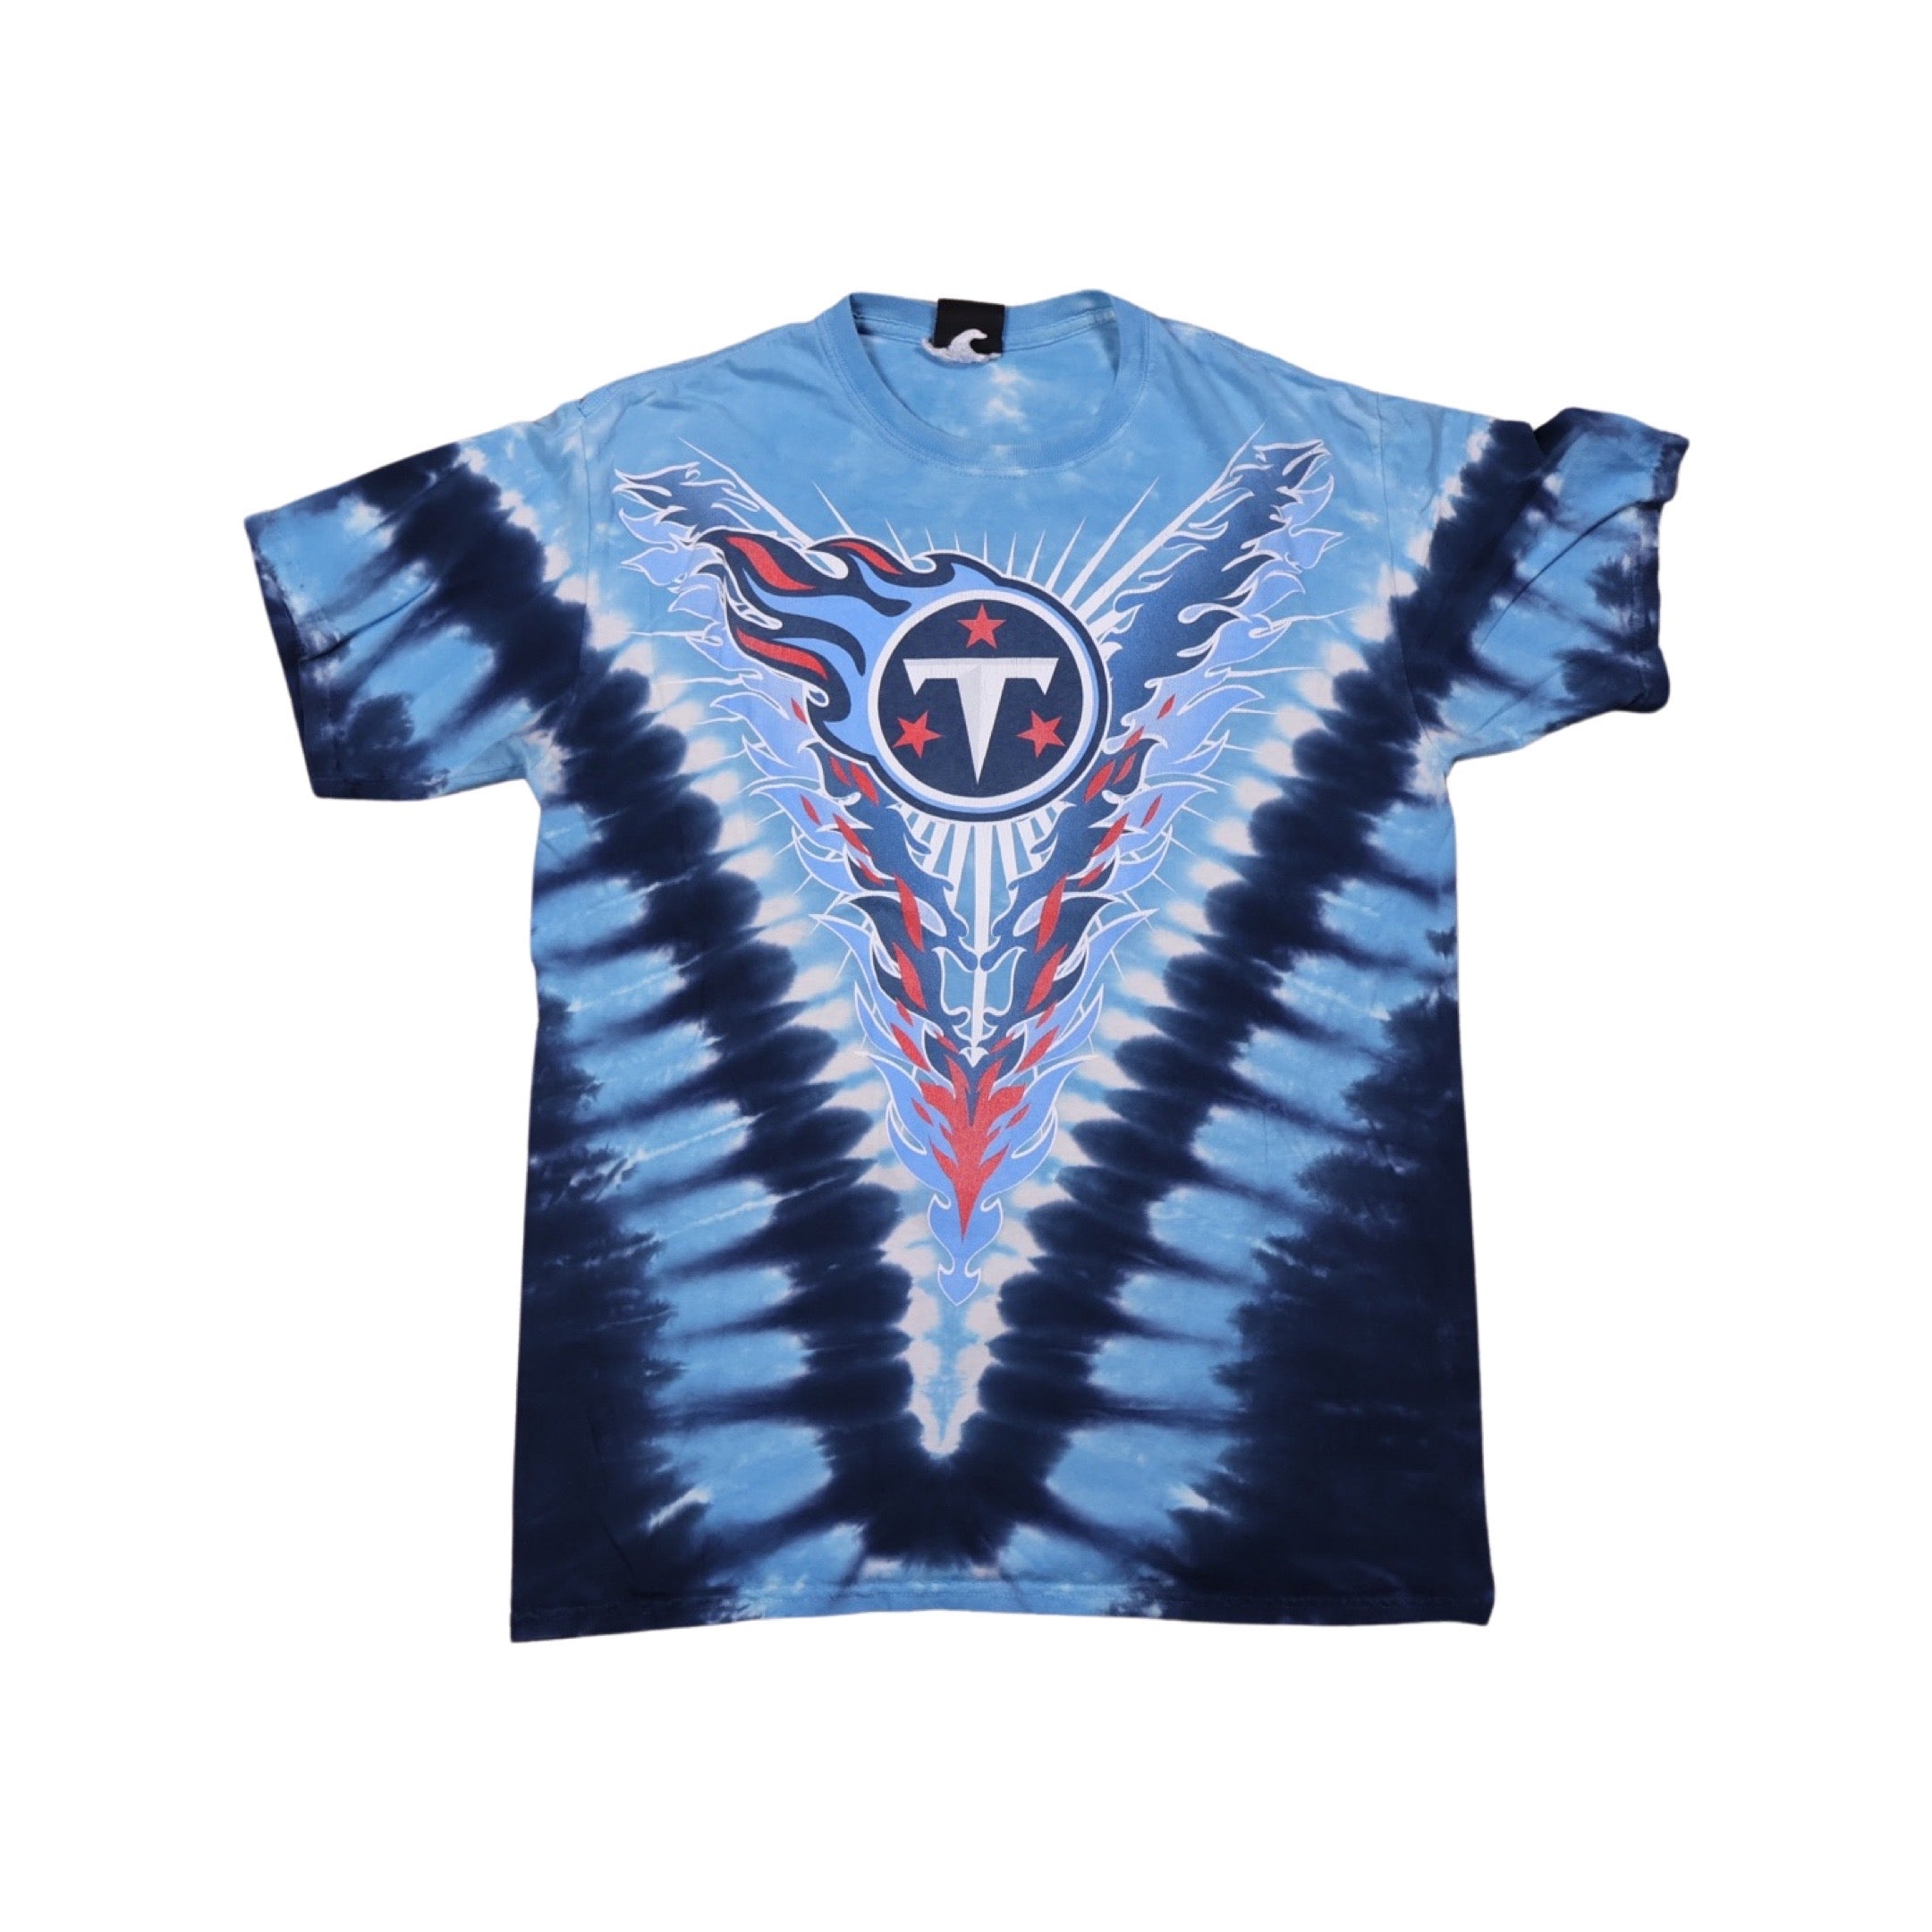 Tennessee Titans Tie-Dye T-Shirt (Large)